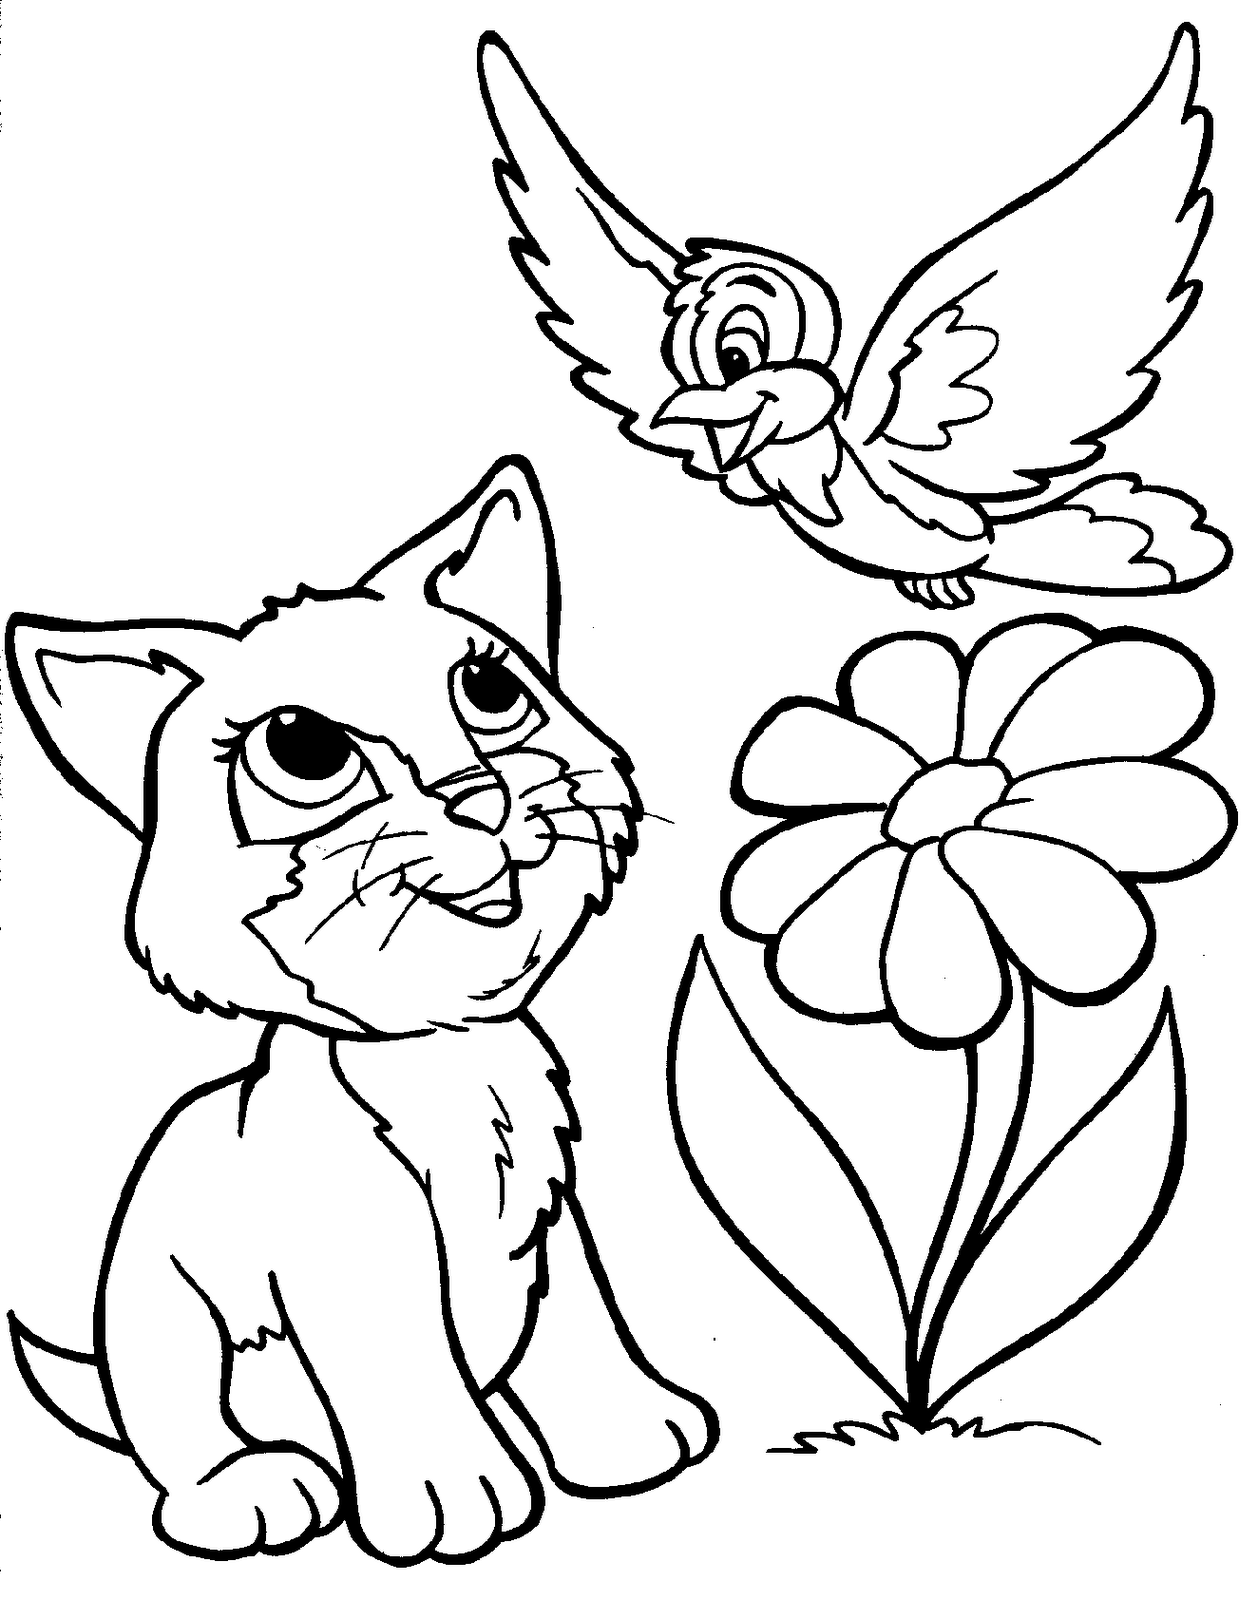 10 Cute Animals Coloring Pages >> Disney Coloring Pages